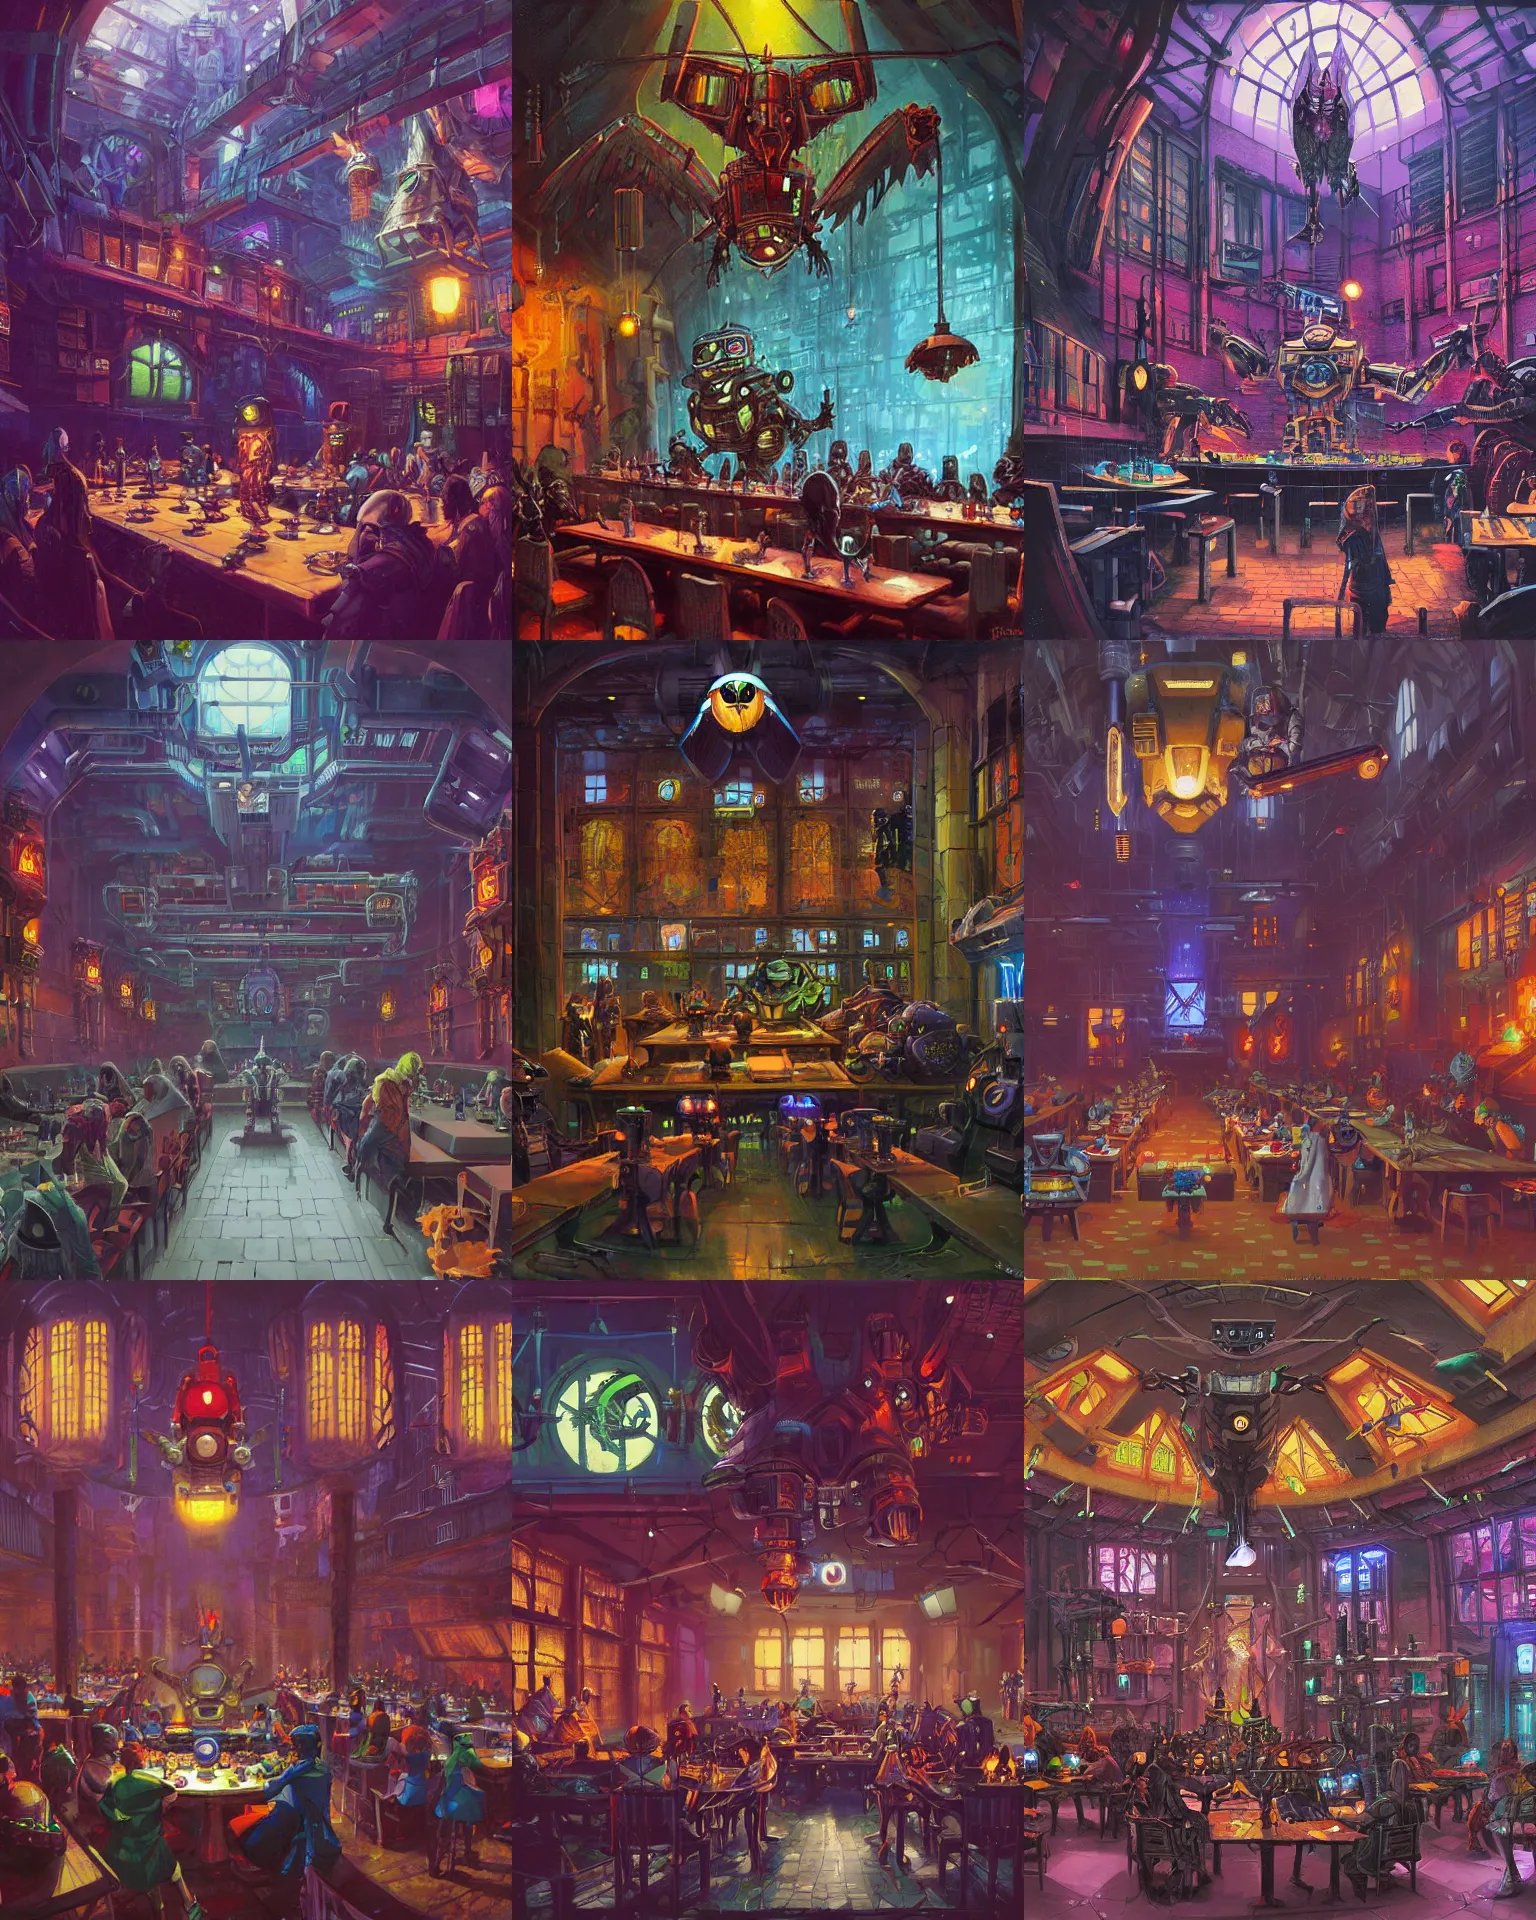 Prompt: a cyberpunk hogwarts dining hall, with a giant robot owl, by paul lehr, jesper ejsing